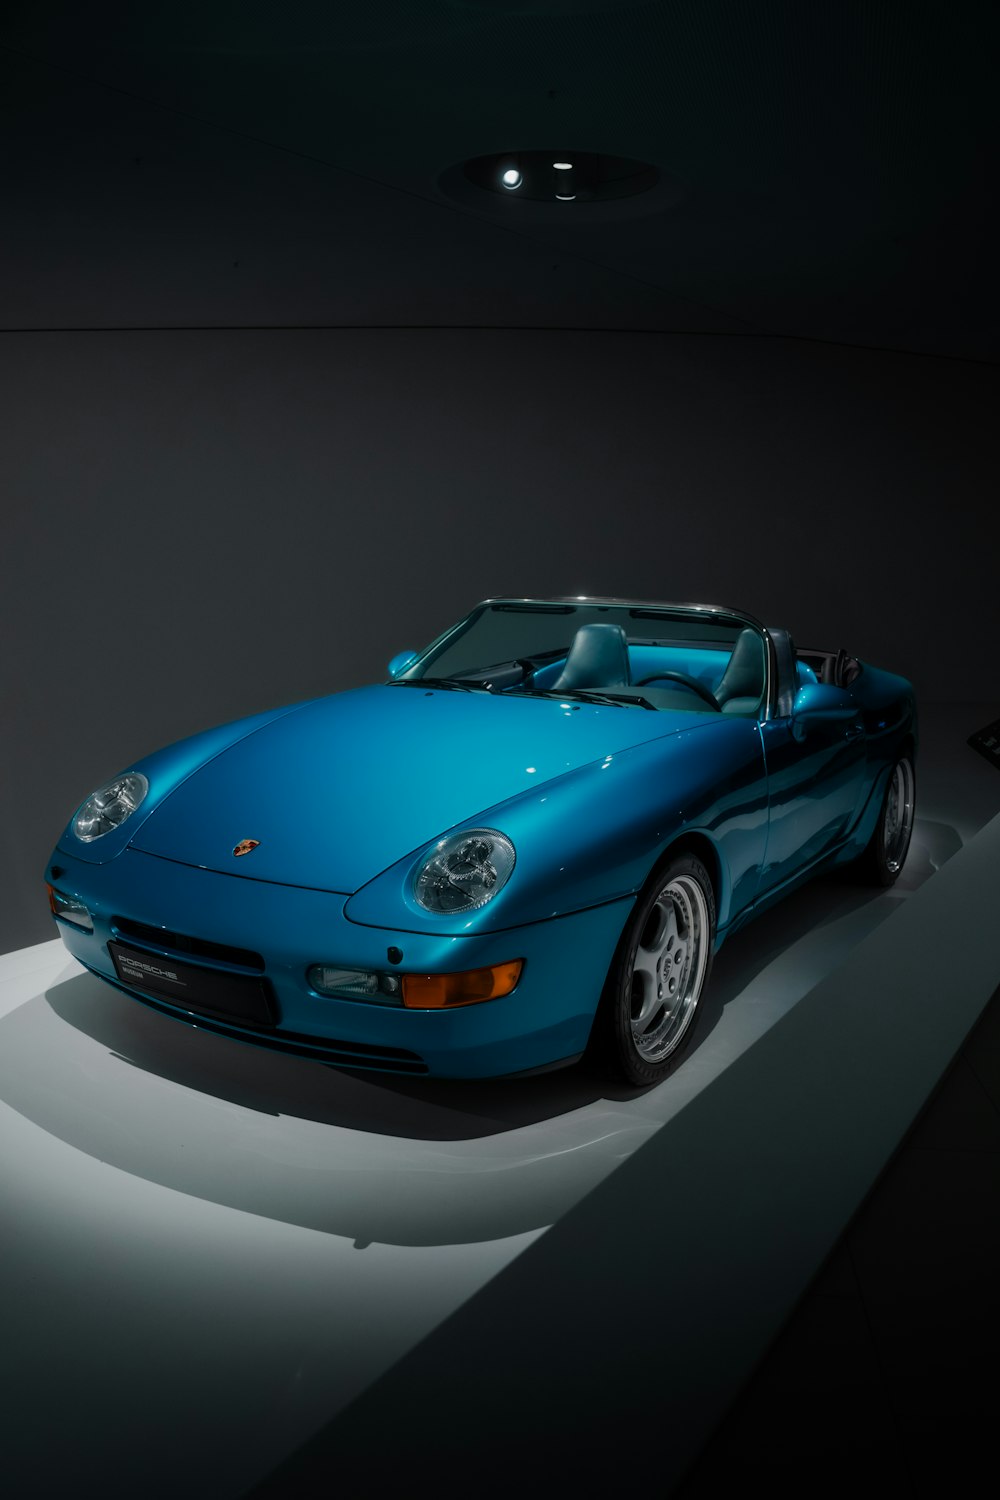 a blue sports car parked in a dark room